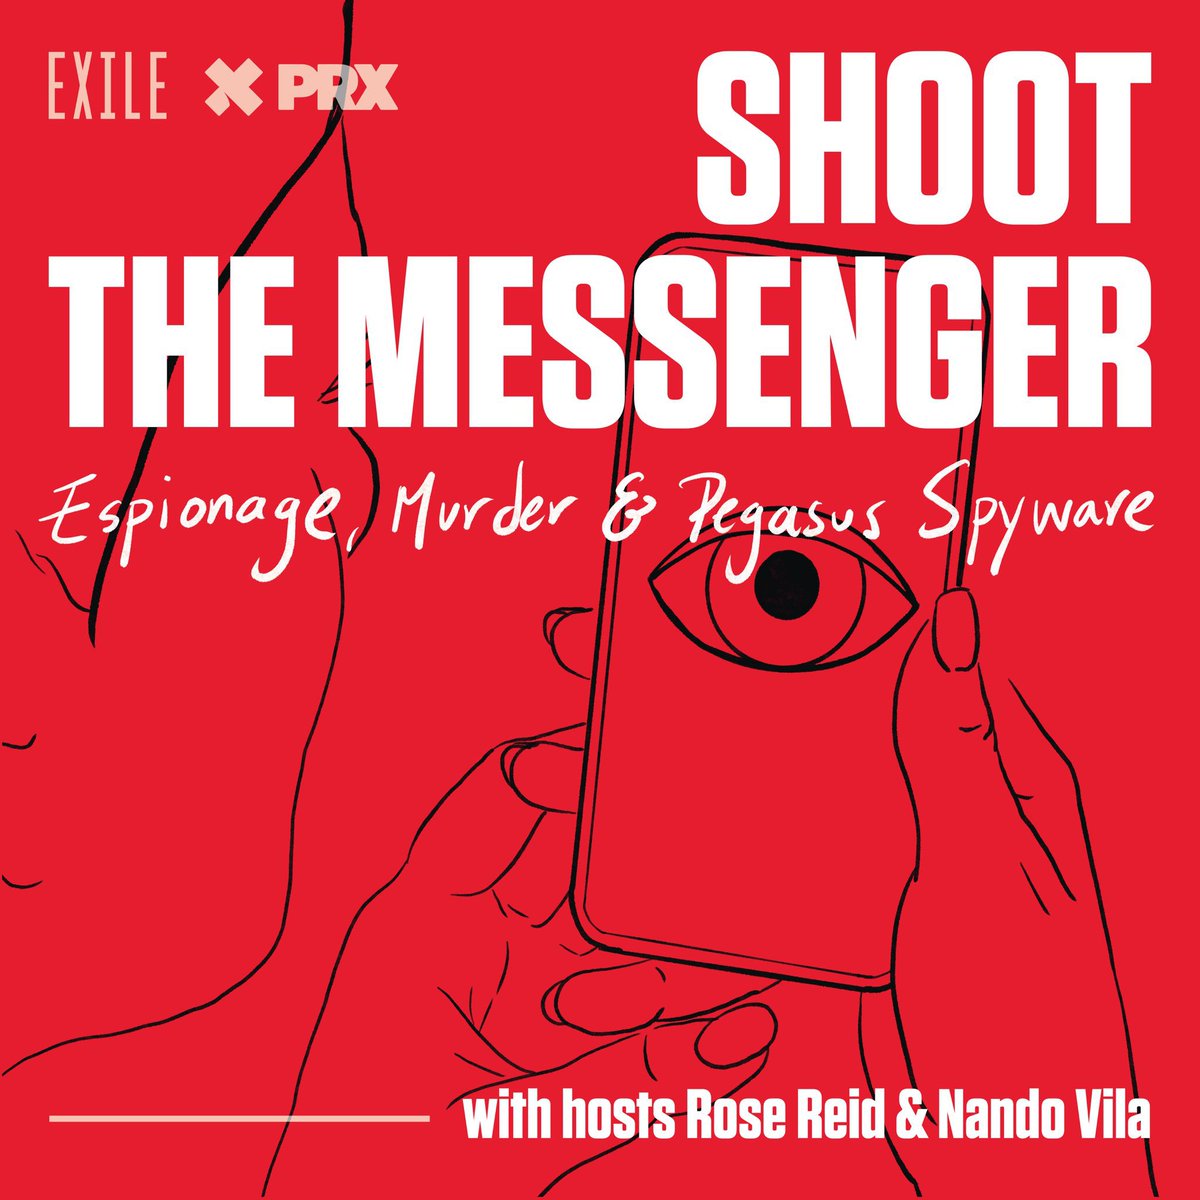 >>@ExileContent and @prx's “Shoot the Messenger: Espionage, Murder, and Pegasus Software,' helps understand the negative impact of spyware on society and how it affects journalists, citizens and the free flow of information: apple.co/3JbS6Ri @audiobyexile @pressfreedom